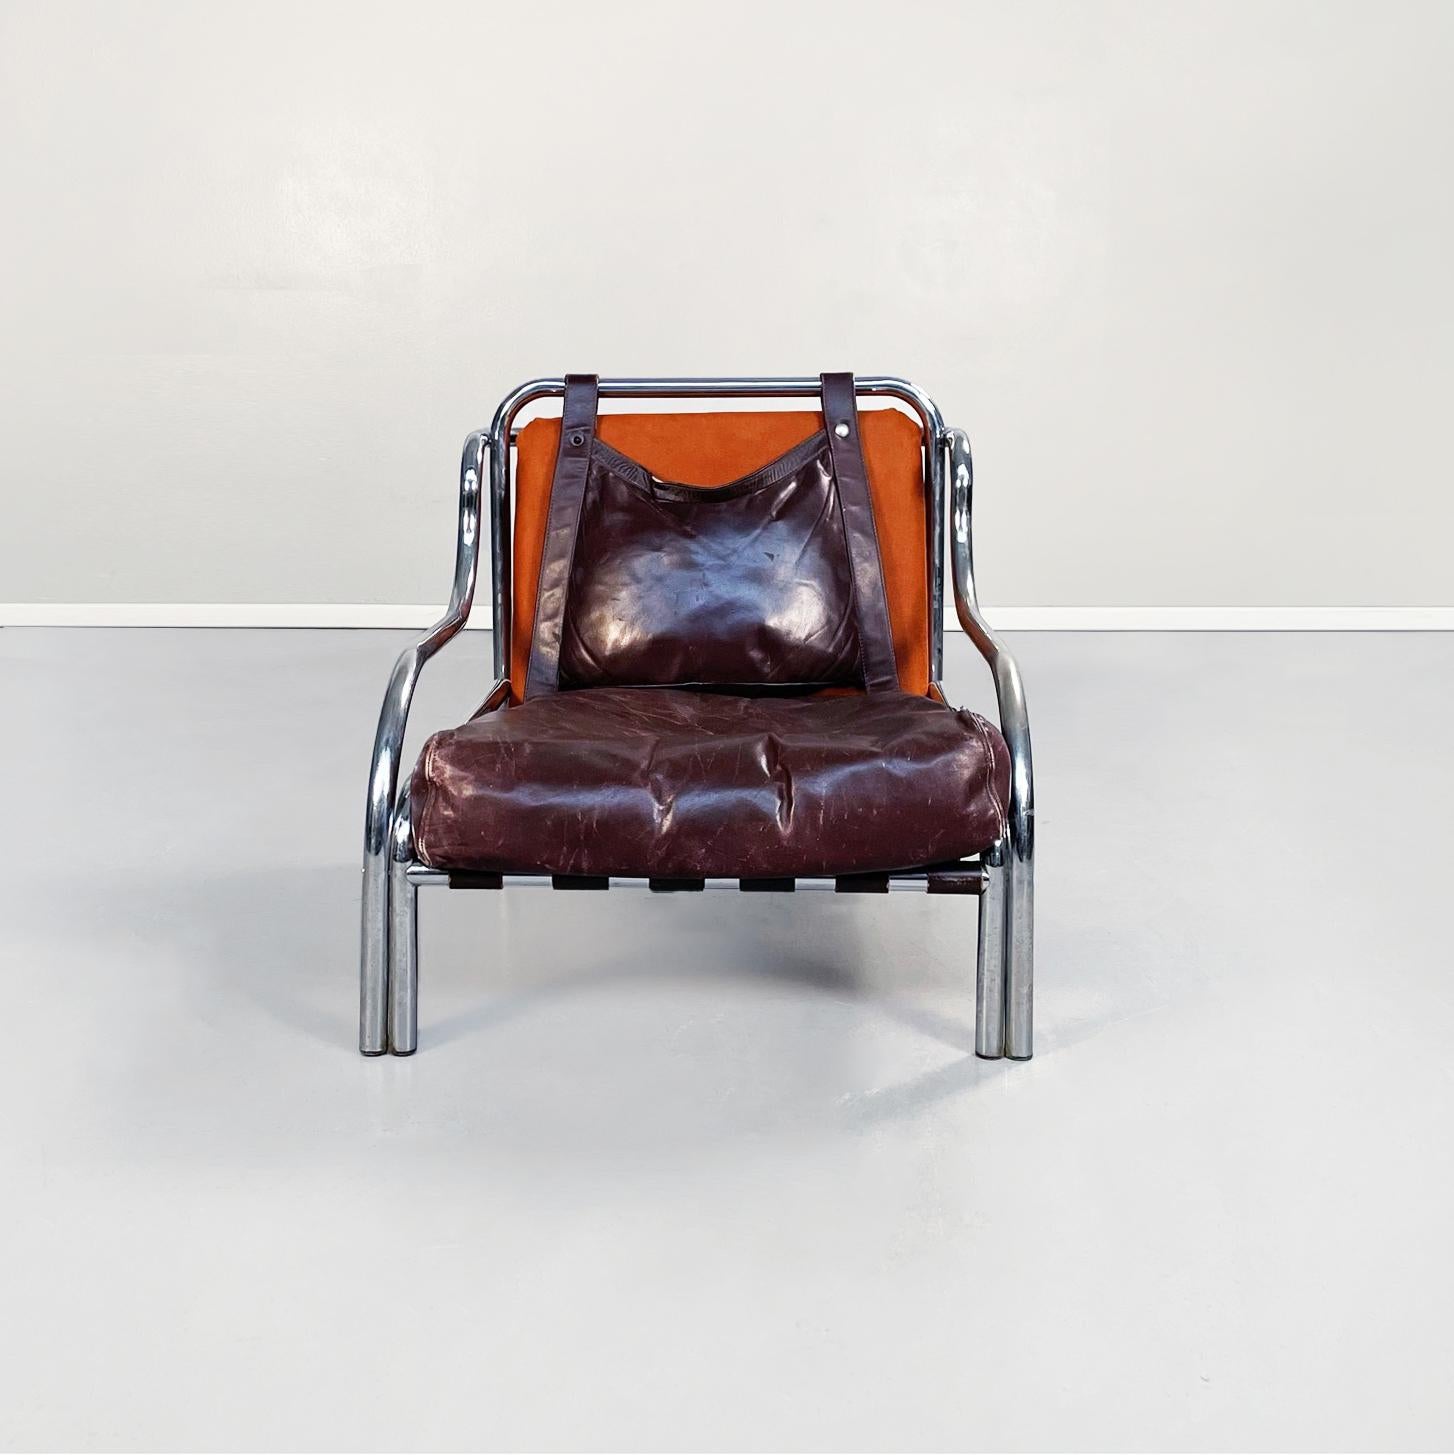 Italian mid-century leather Stringa armchair by Gae Aulenti for Poltronova, 1965
Stringa armchair. The tubular structure is in chromed metal. Brown leather cushion is tied to the orange suede backrest, while the seat is made up of brown leather